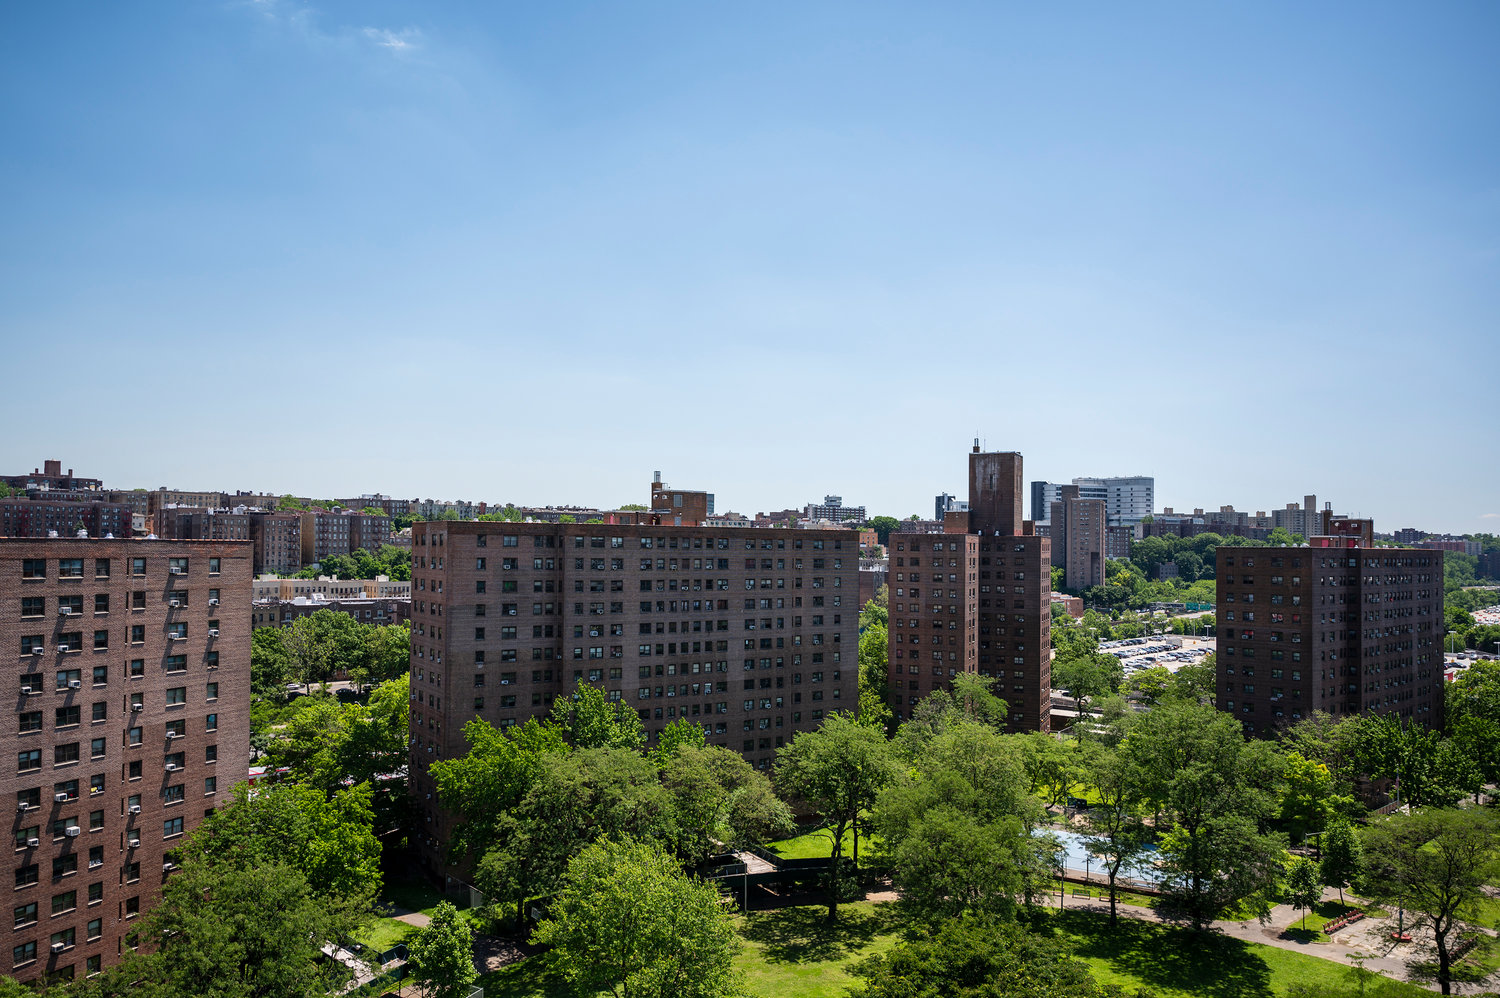 Marble Hill Houses could be one of New York City’s public housing complexes that could benefit from the newly formed public trust formed by legislation that allows New York City Housing Authority to indirectly sell municipal bonds to finance projects.